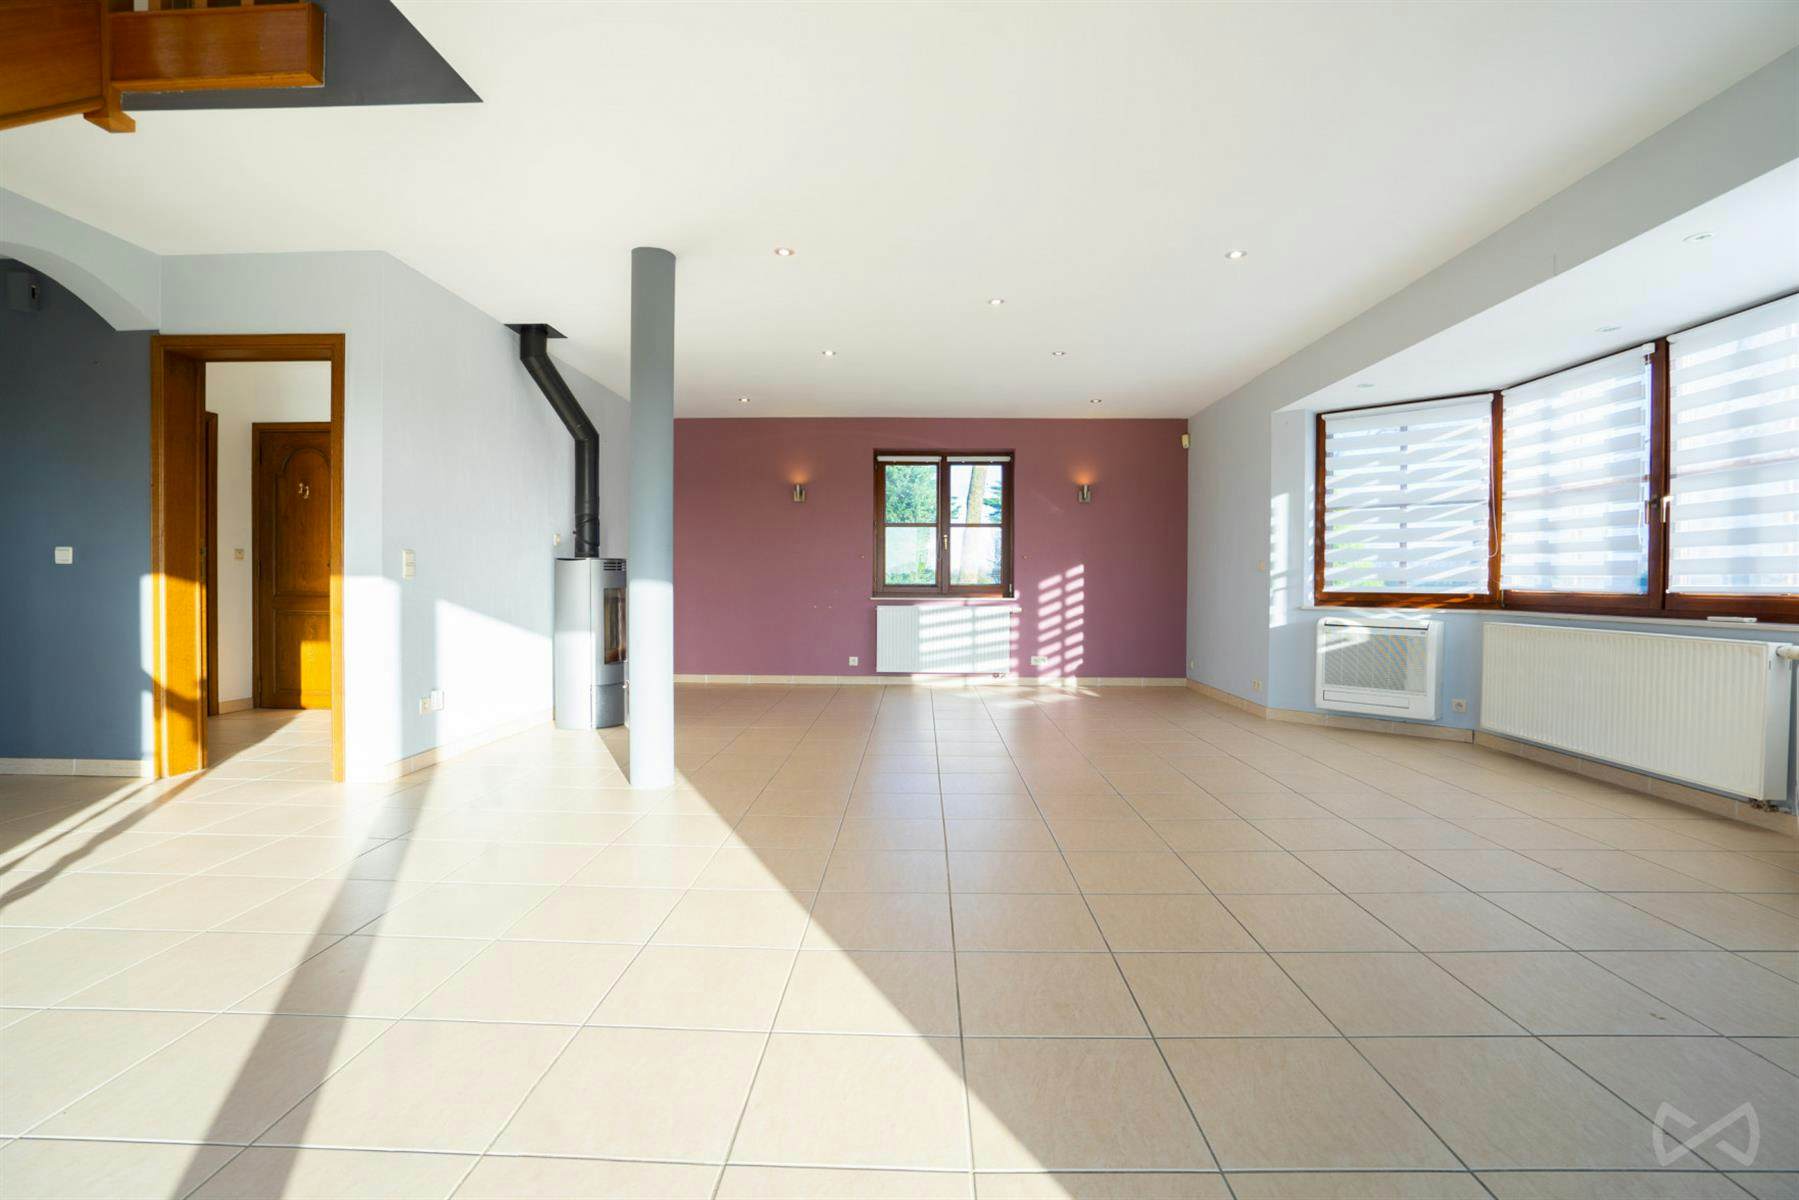 Picture 3 of 4 for House with three bedrooms in Soignies